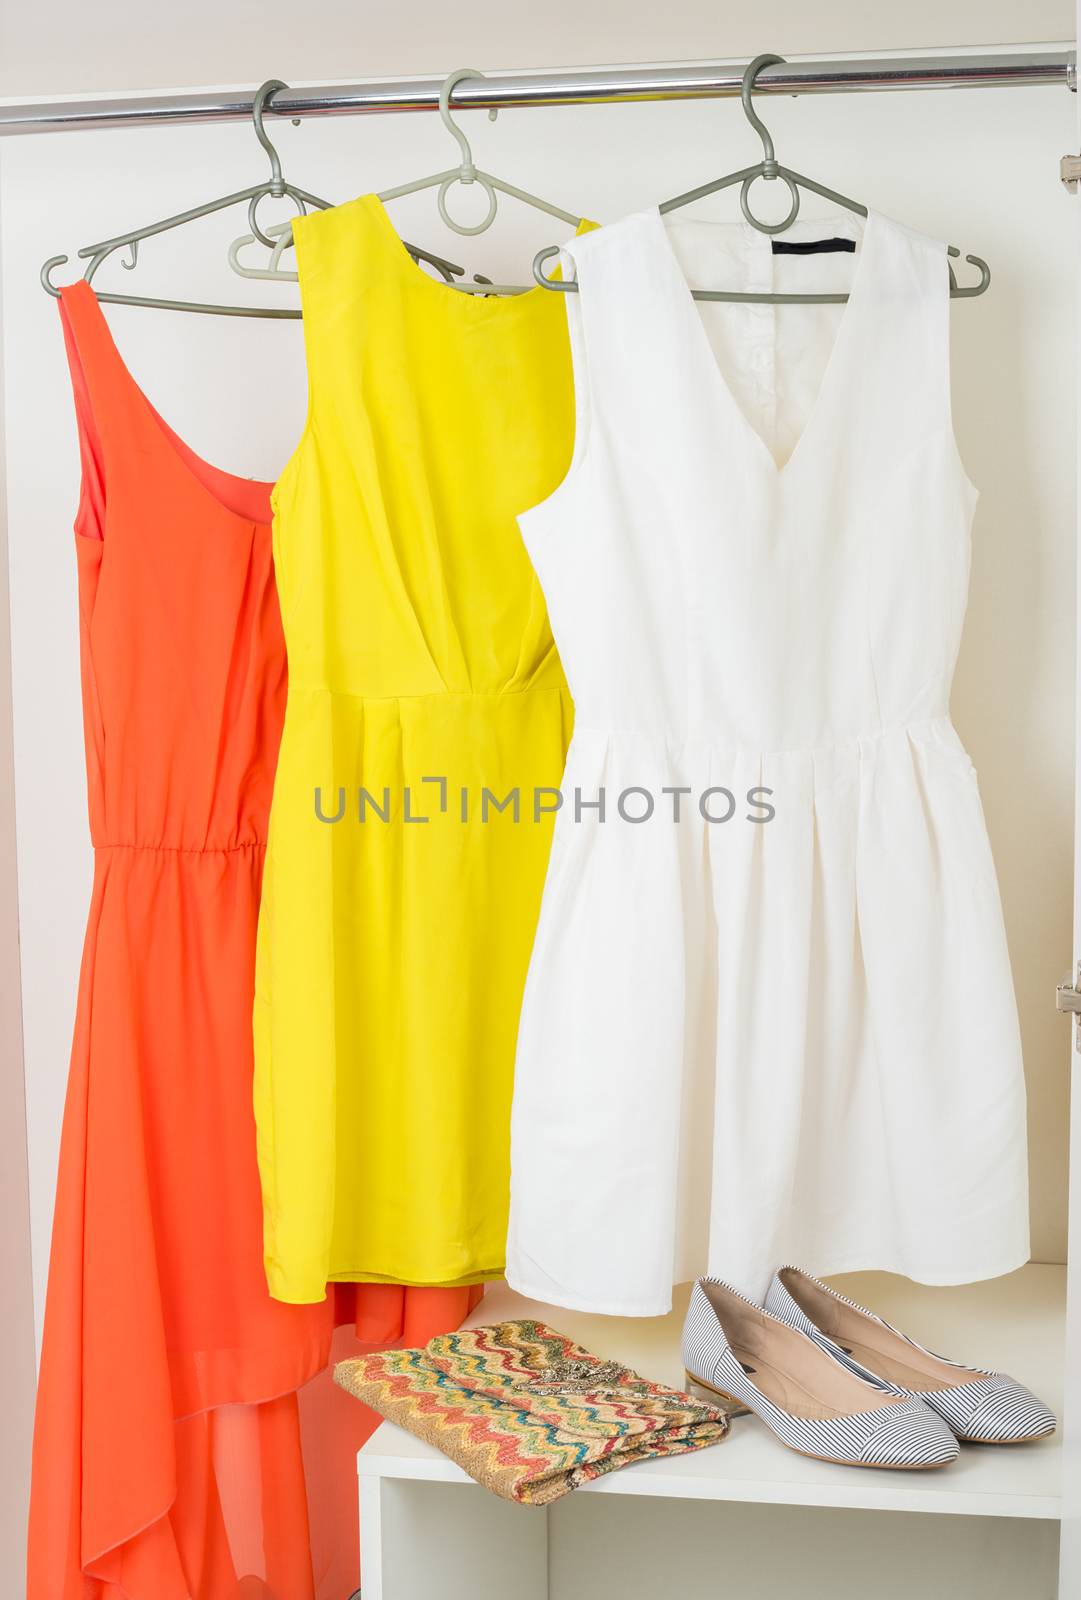 bright colorful dresses hanging on coat hanger, shoes and handba by iprachenko